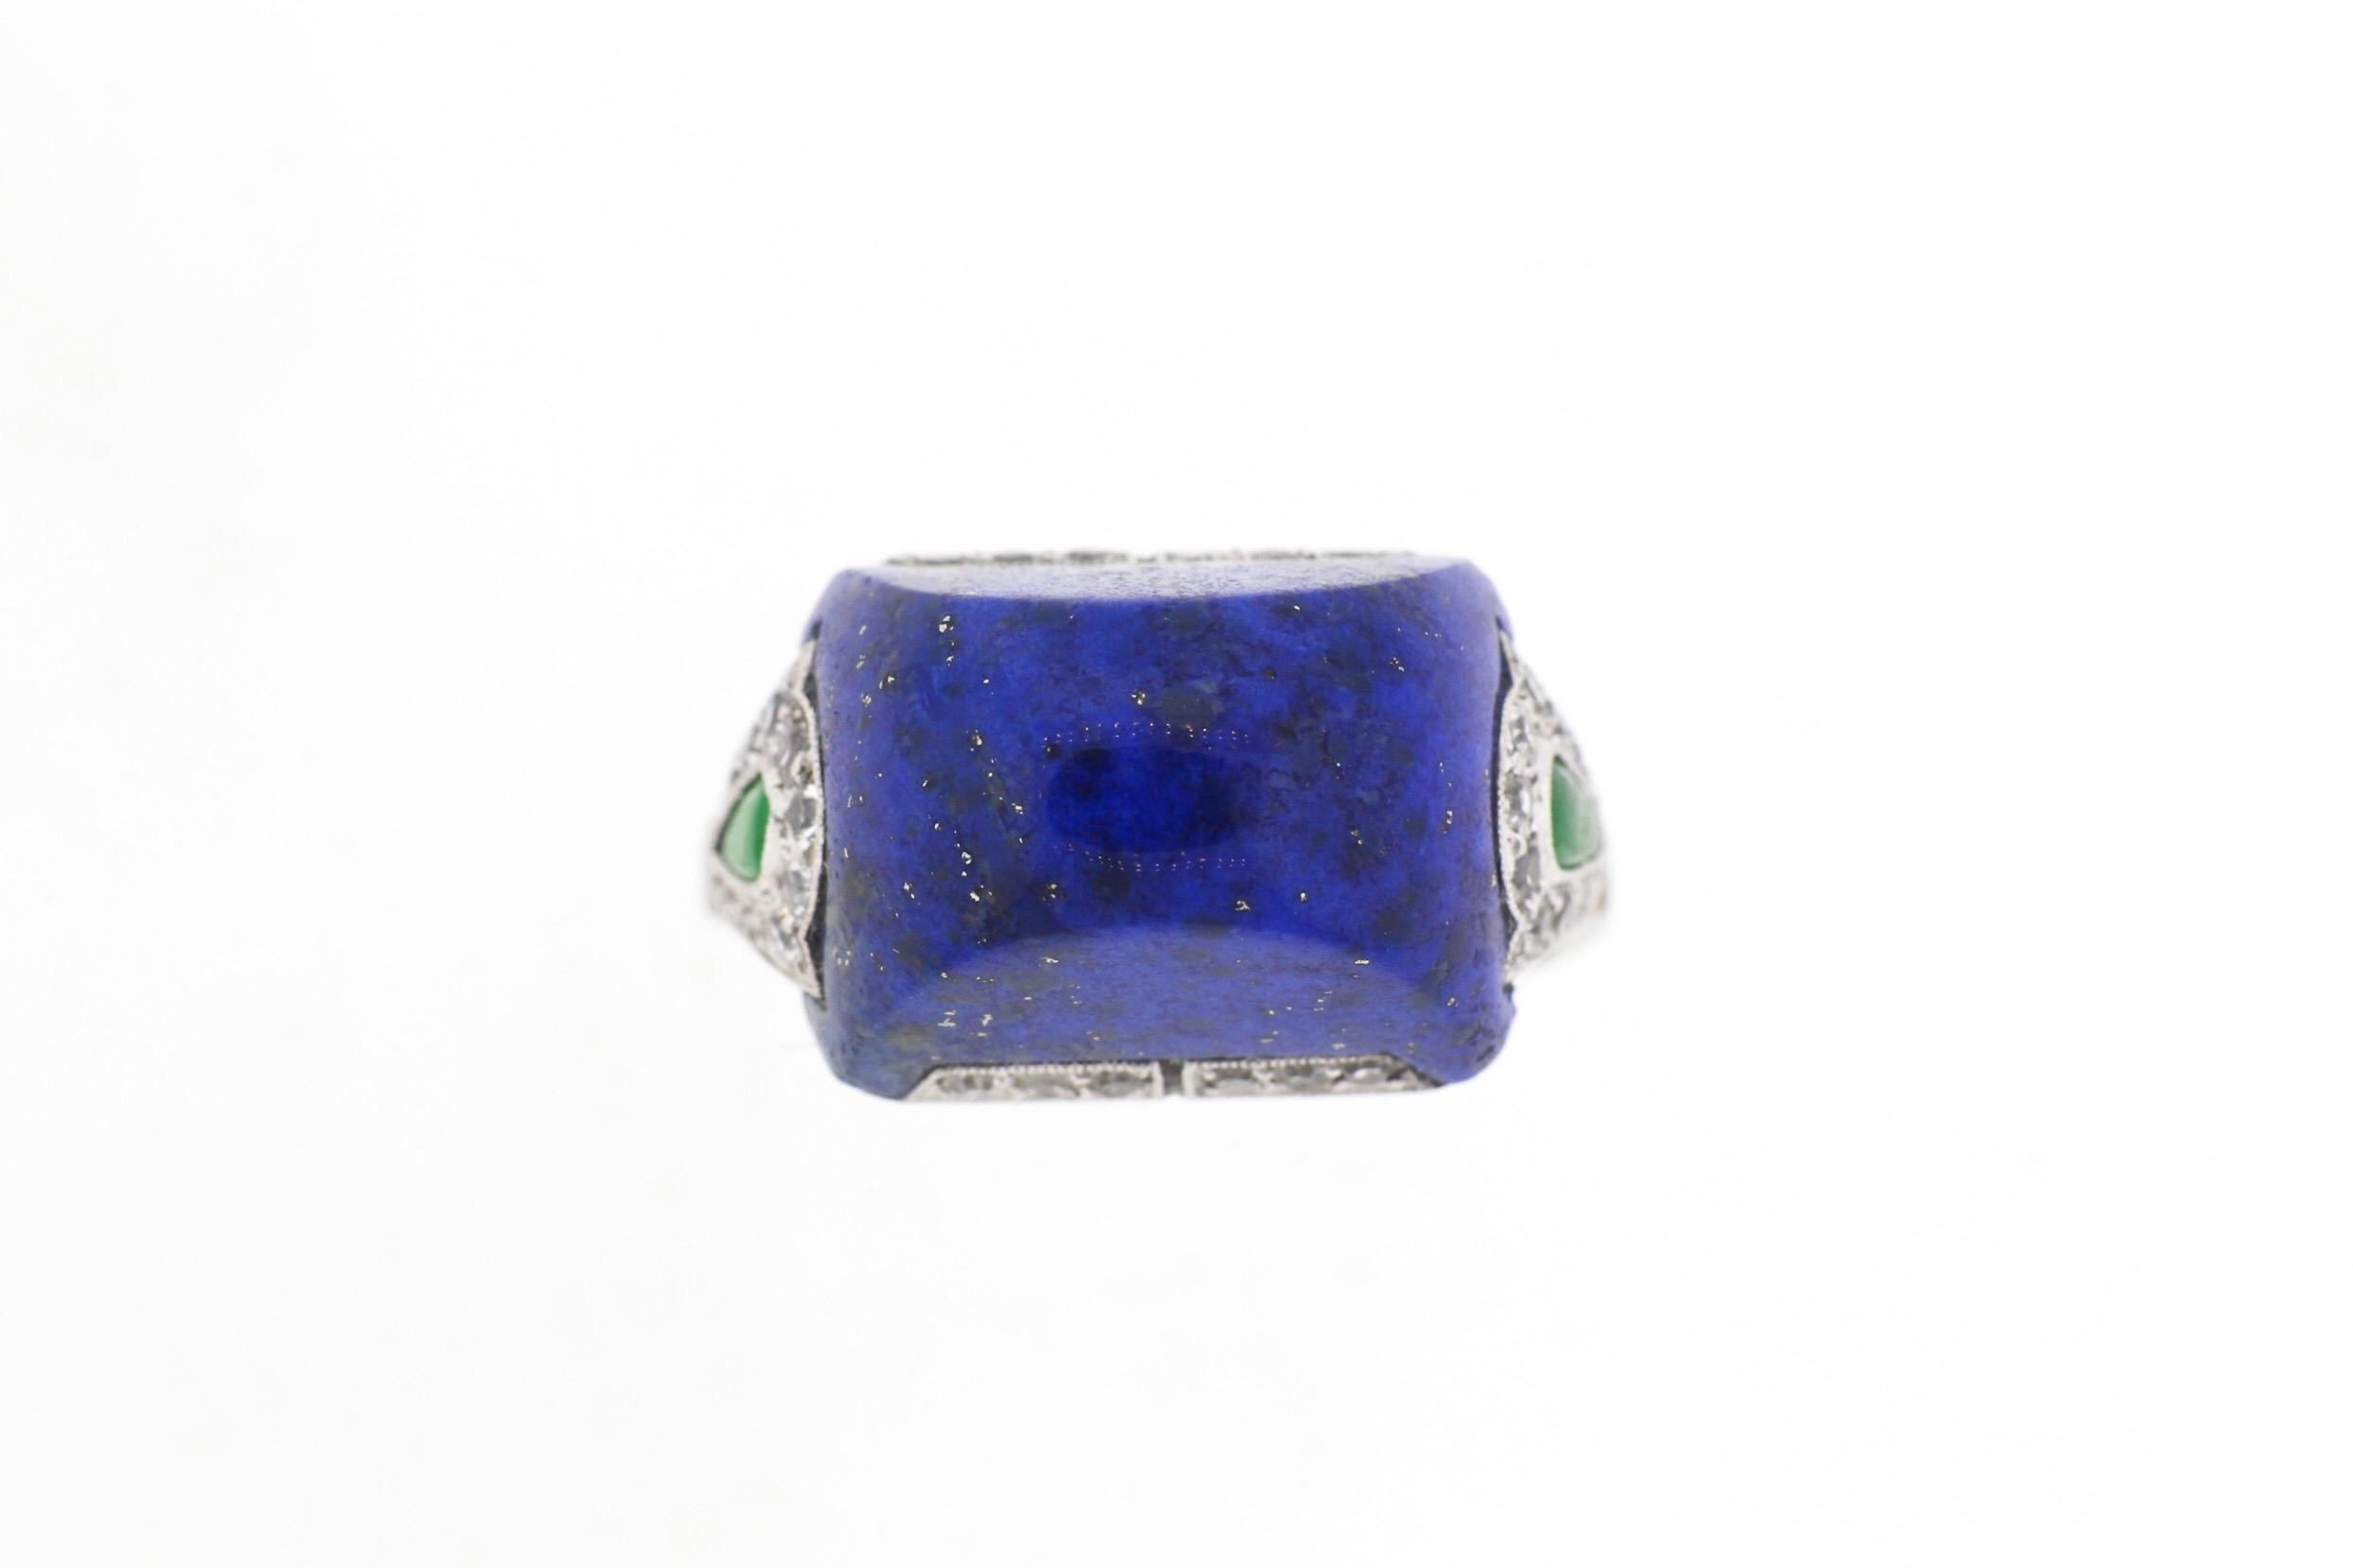 An Art Deco lapis and diamond ring with jade accents, circa 1920. Centering upon a sugar loaf cut domed lapis, the shoulders are set with rosecut diamonds and accented by a pear shape jade. The colors and design are classic Art Deco elements. The